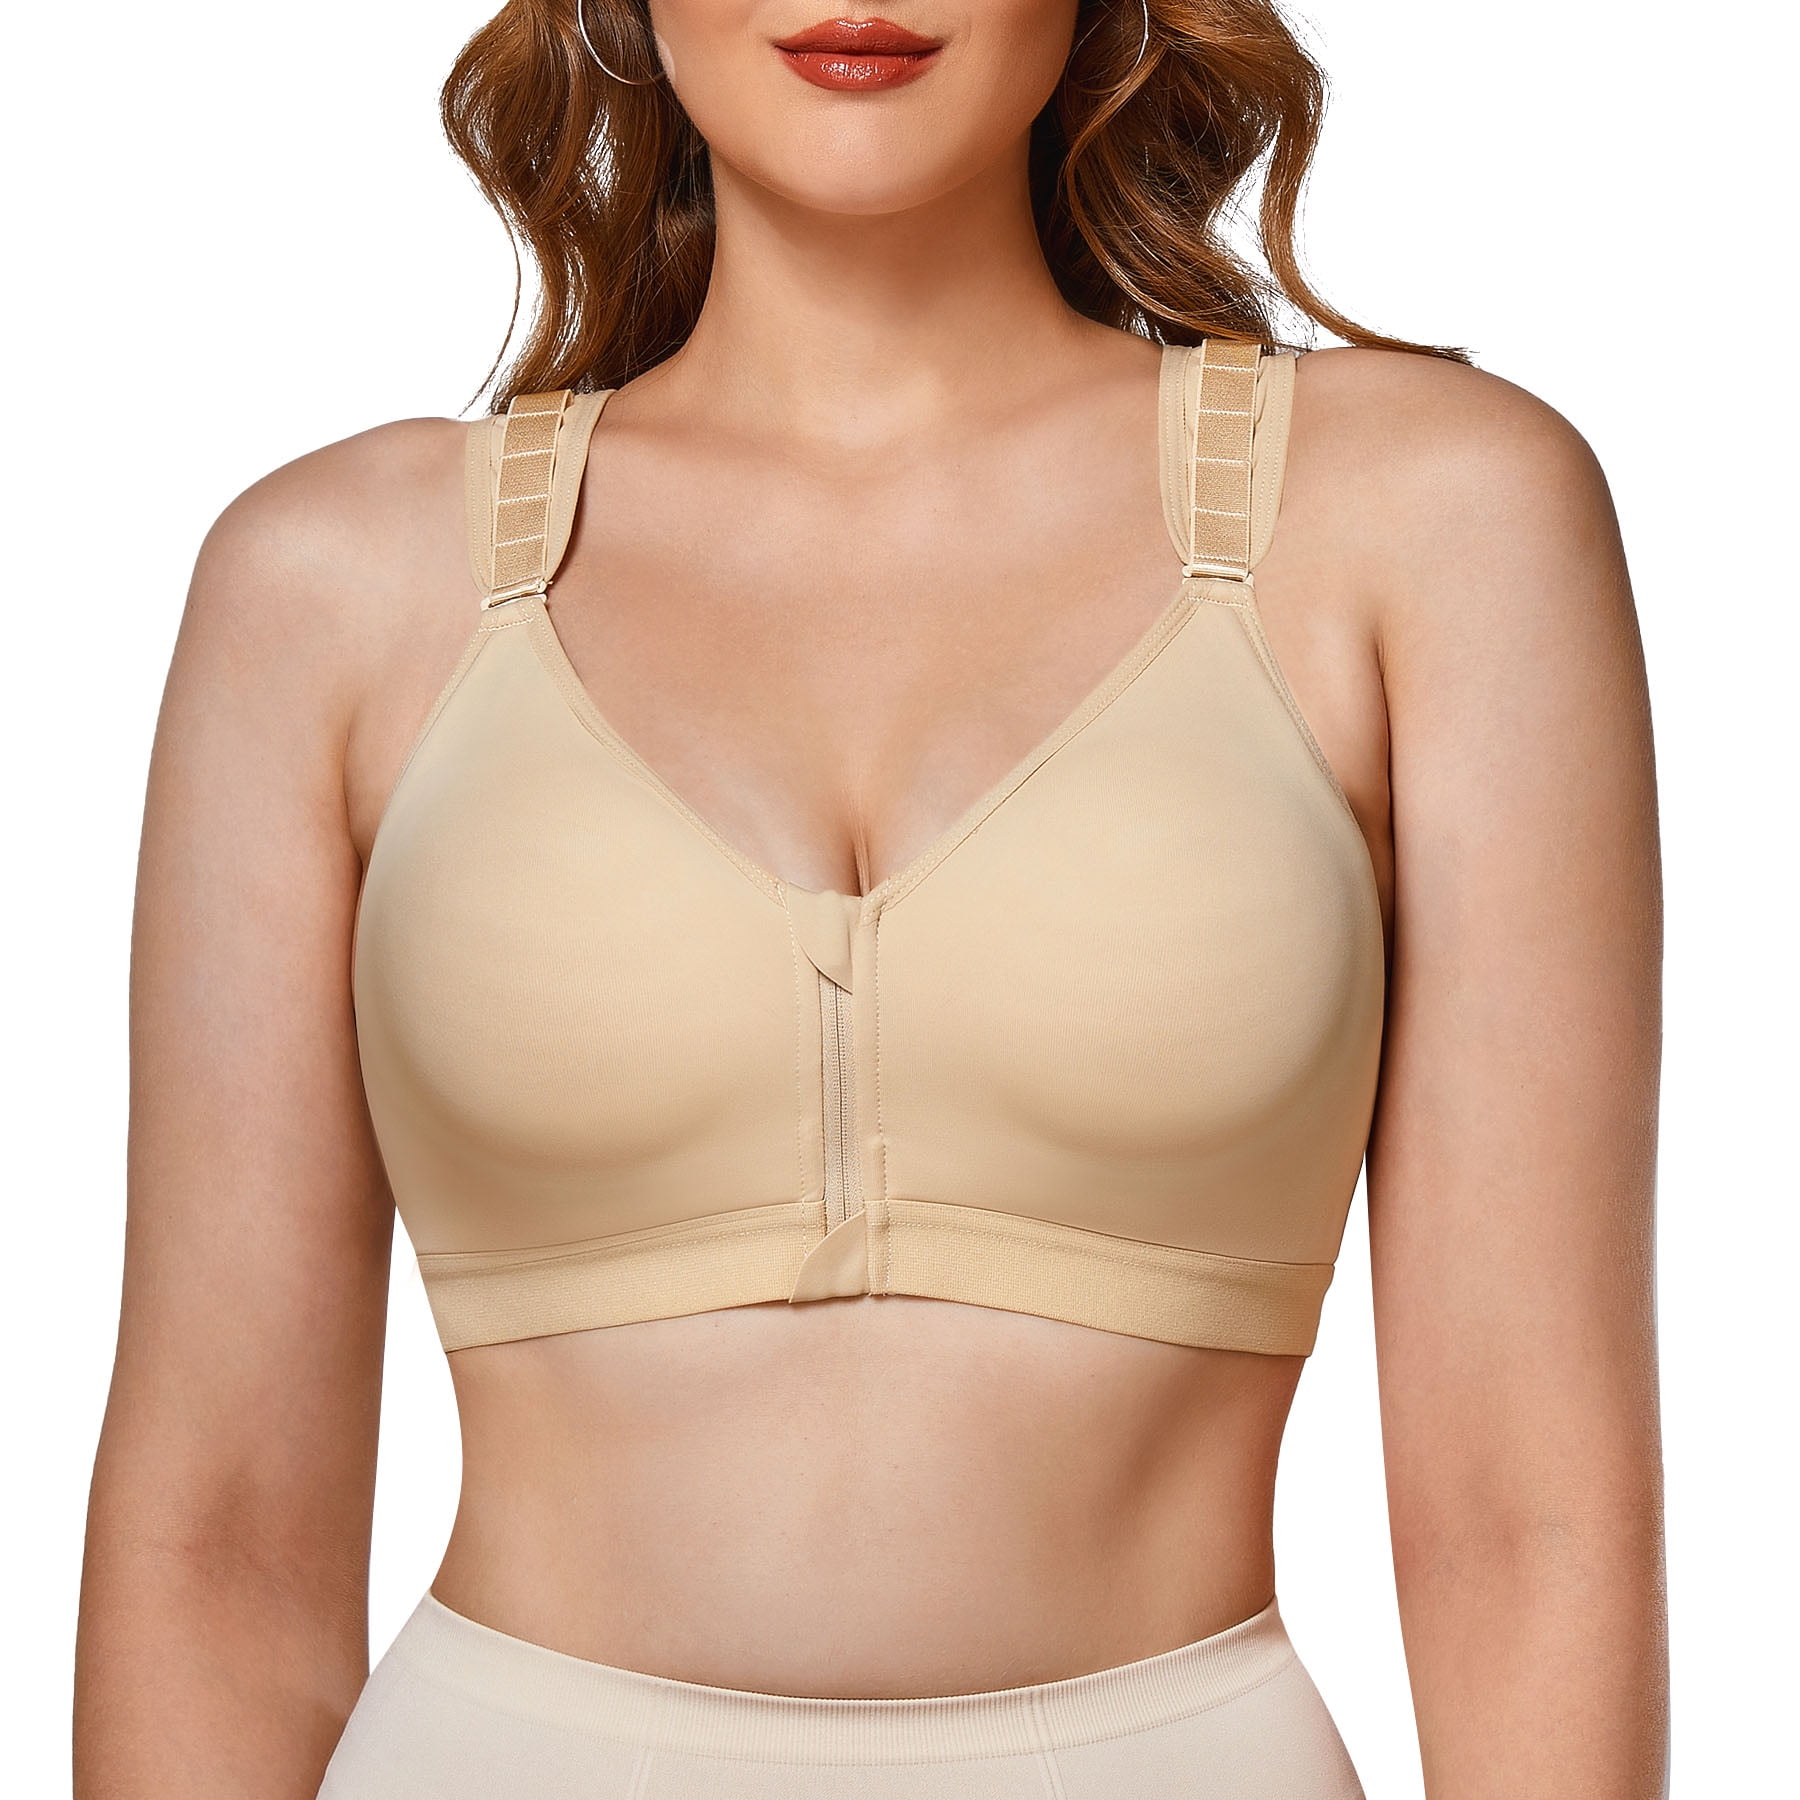 Gotoly Women Post Surgery Sports Bras Post-Surgical Bra Zip Front Racerback  Support Wireless Adjustable Straps(Beige Large)